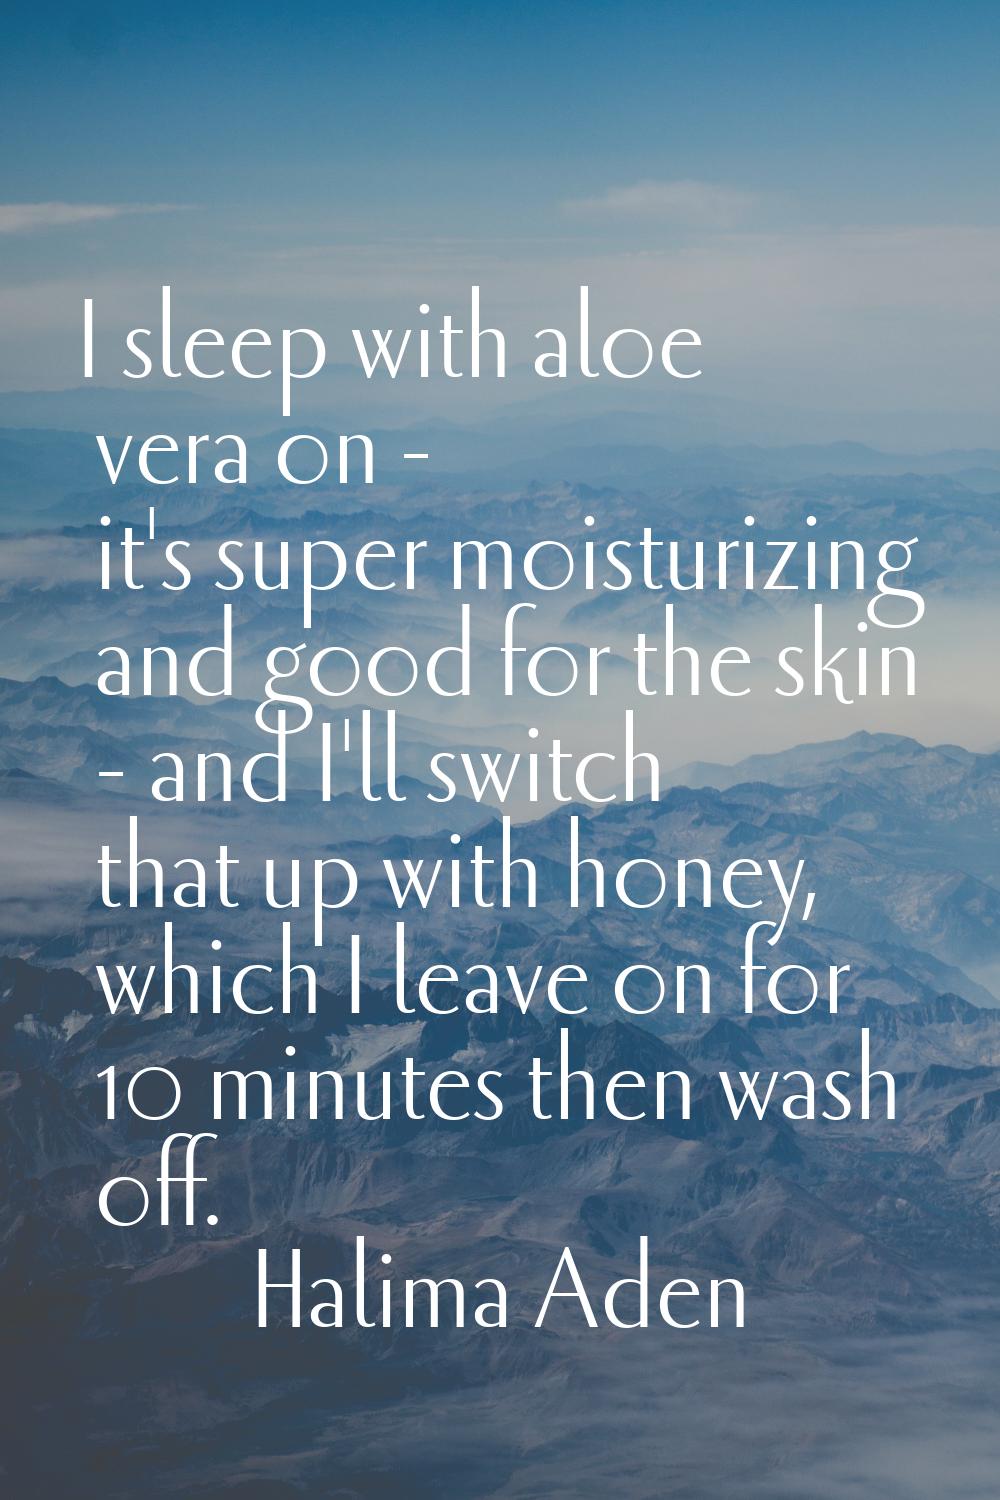 I sleep with aloe vera on - it's super moisturizing and good for the skin - and I'll switch that up